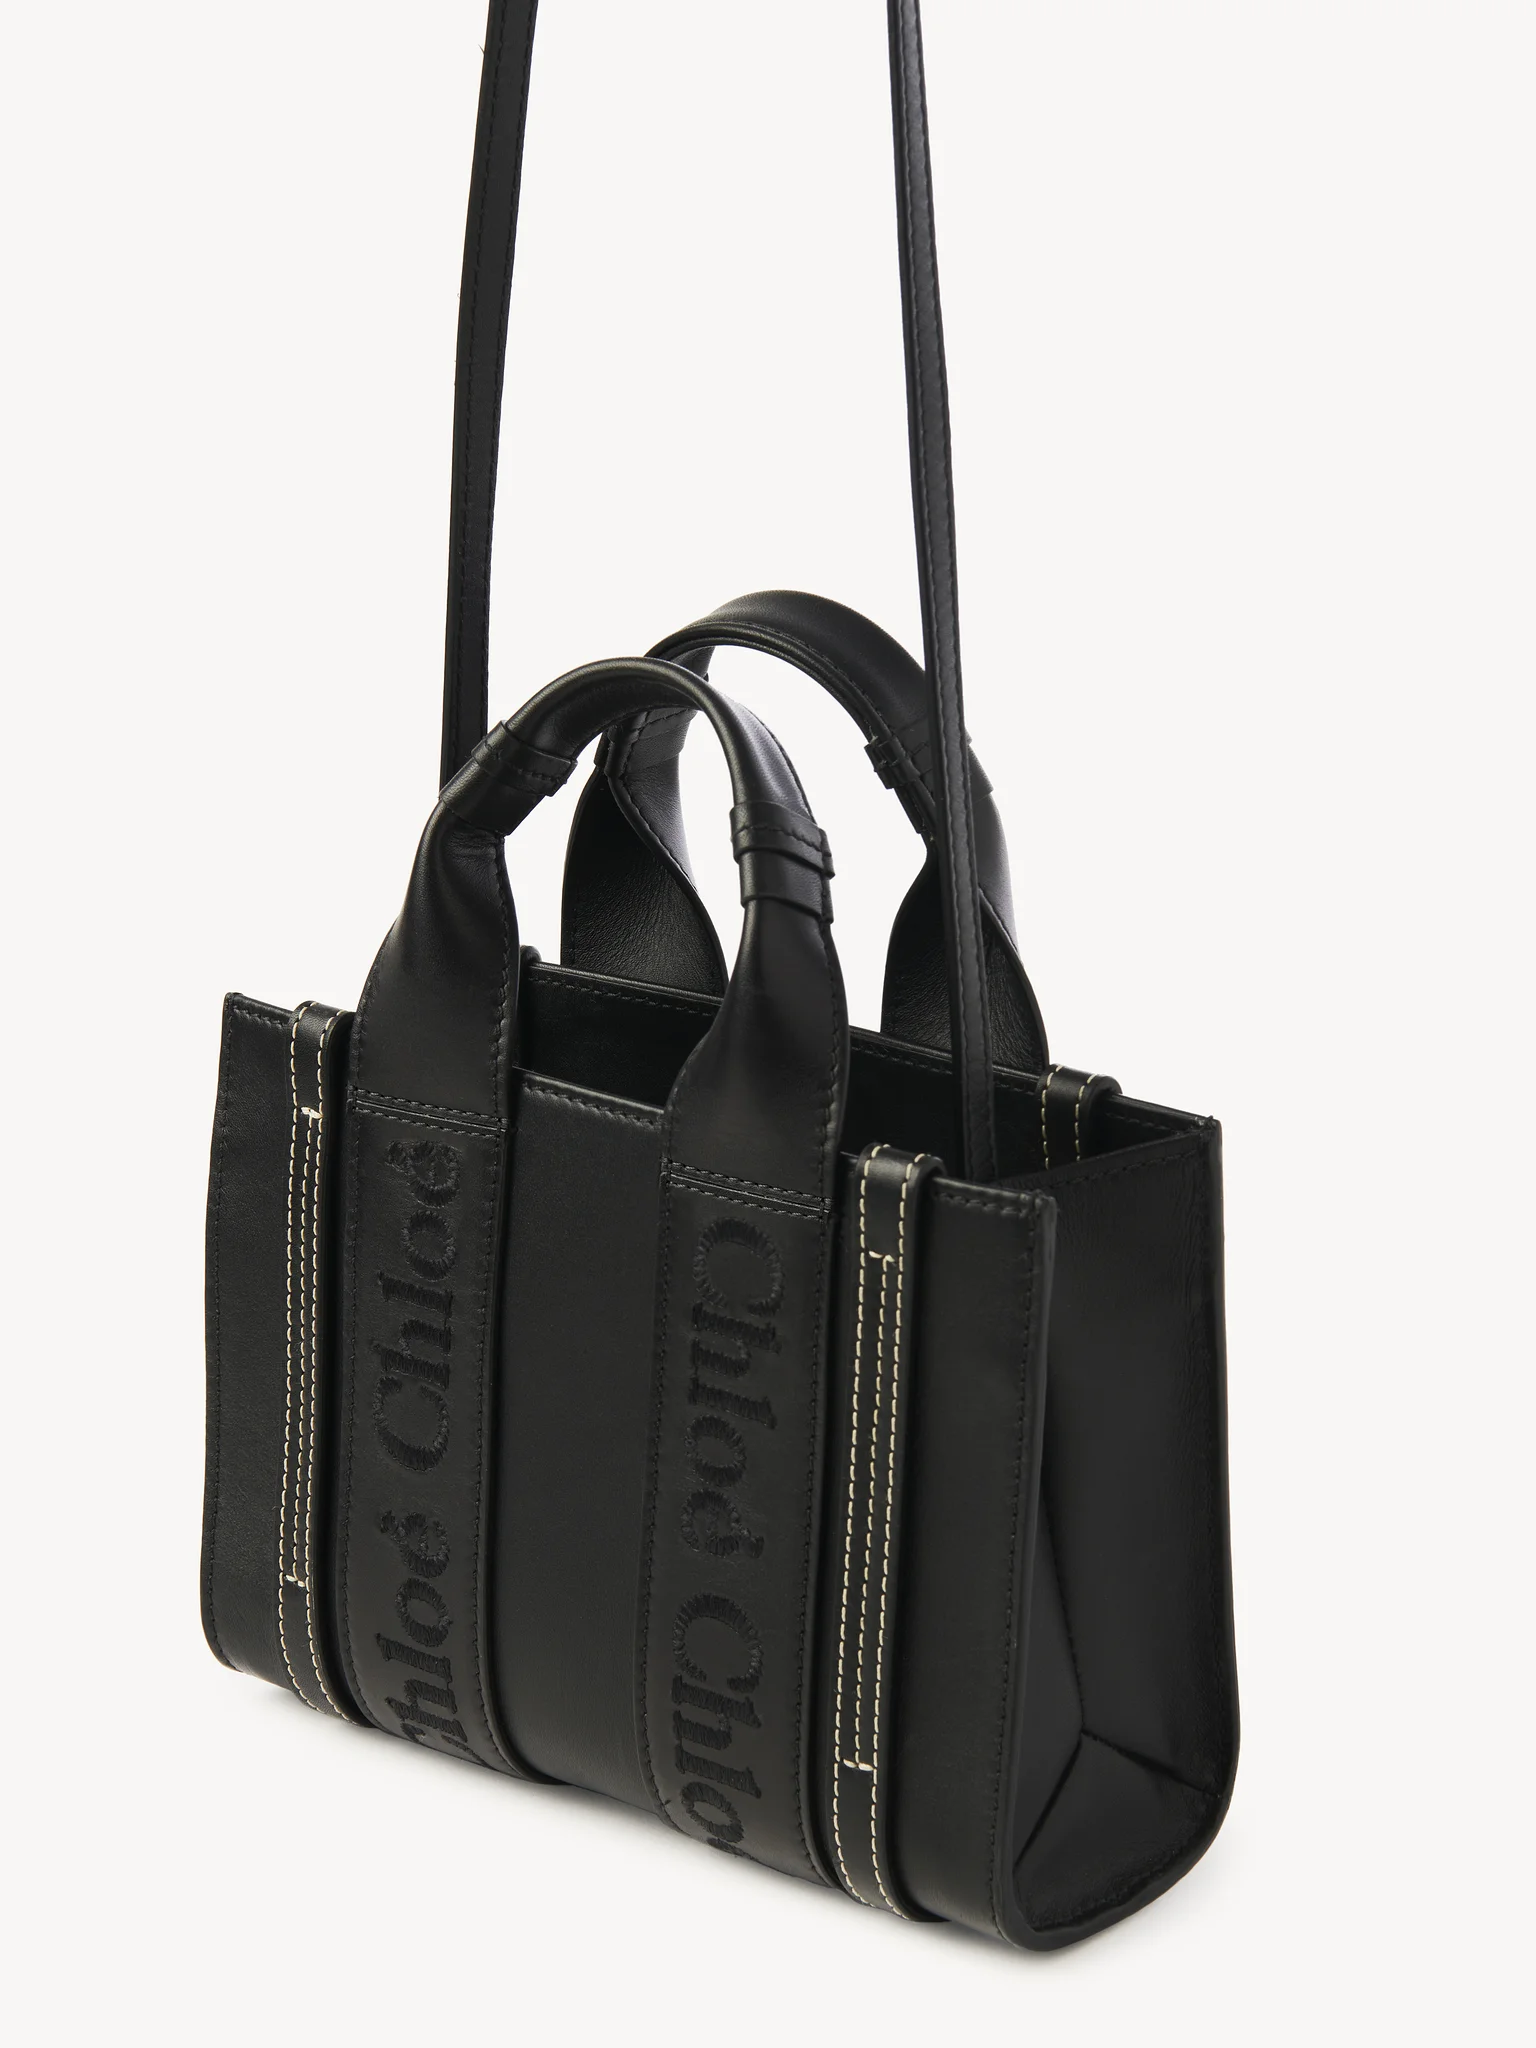 Chloe Woody Mini Leather Tote With Strap in Black available at TNT The New Trend Australia.